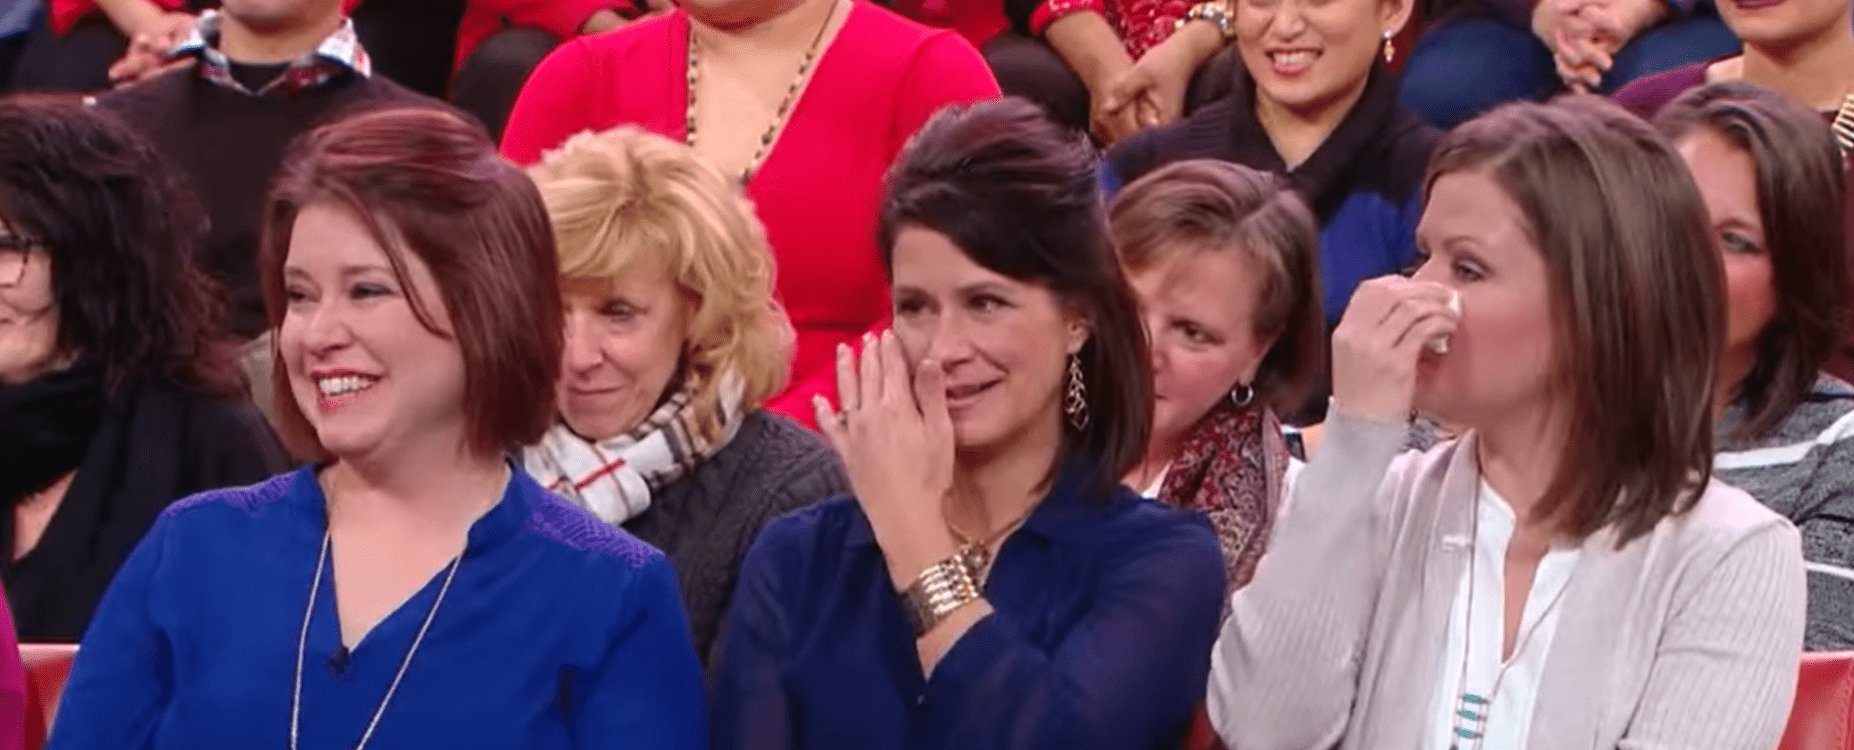 Audience member attending the "Rachael Ray" show smiling and tearing up. │Source: youtube.com/Rachael Ray Show